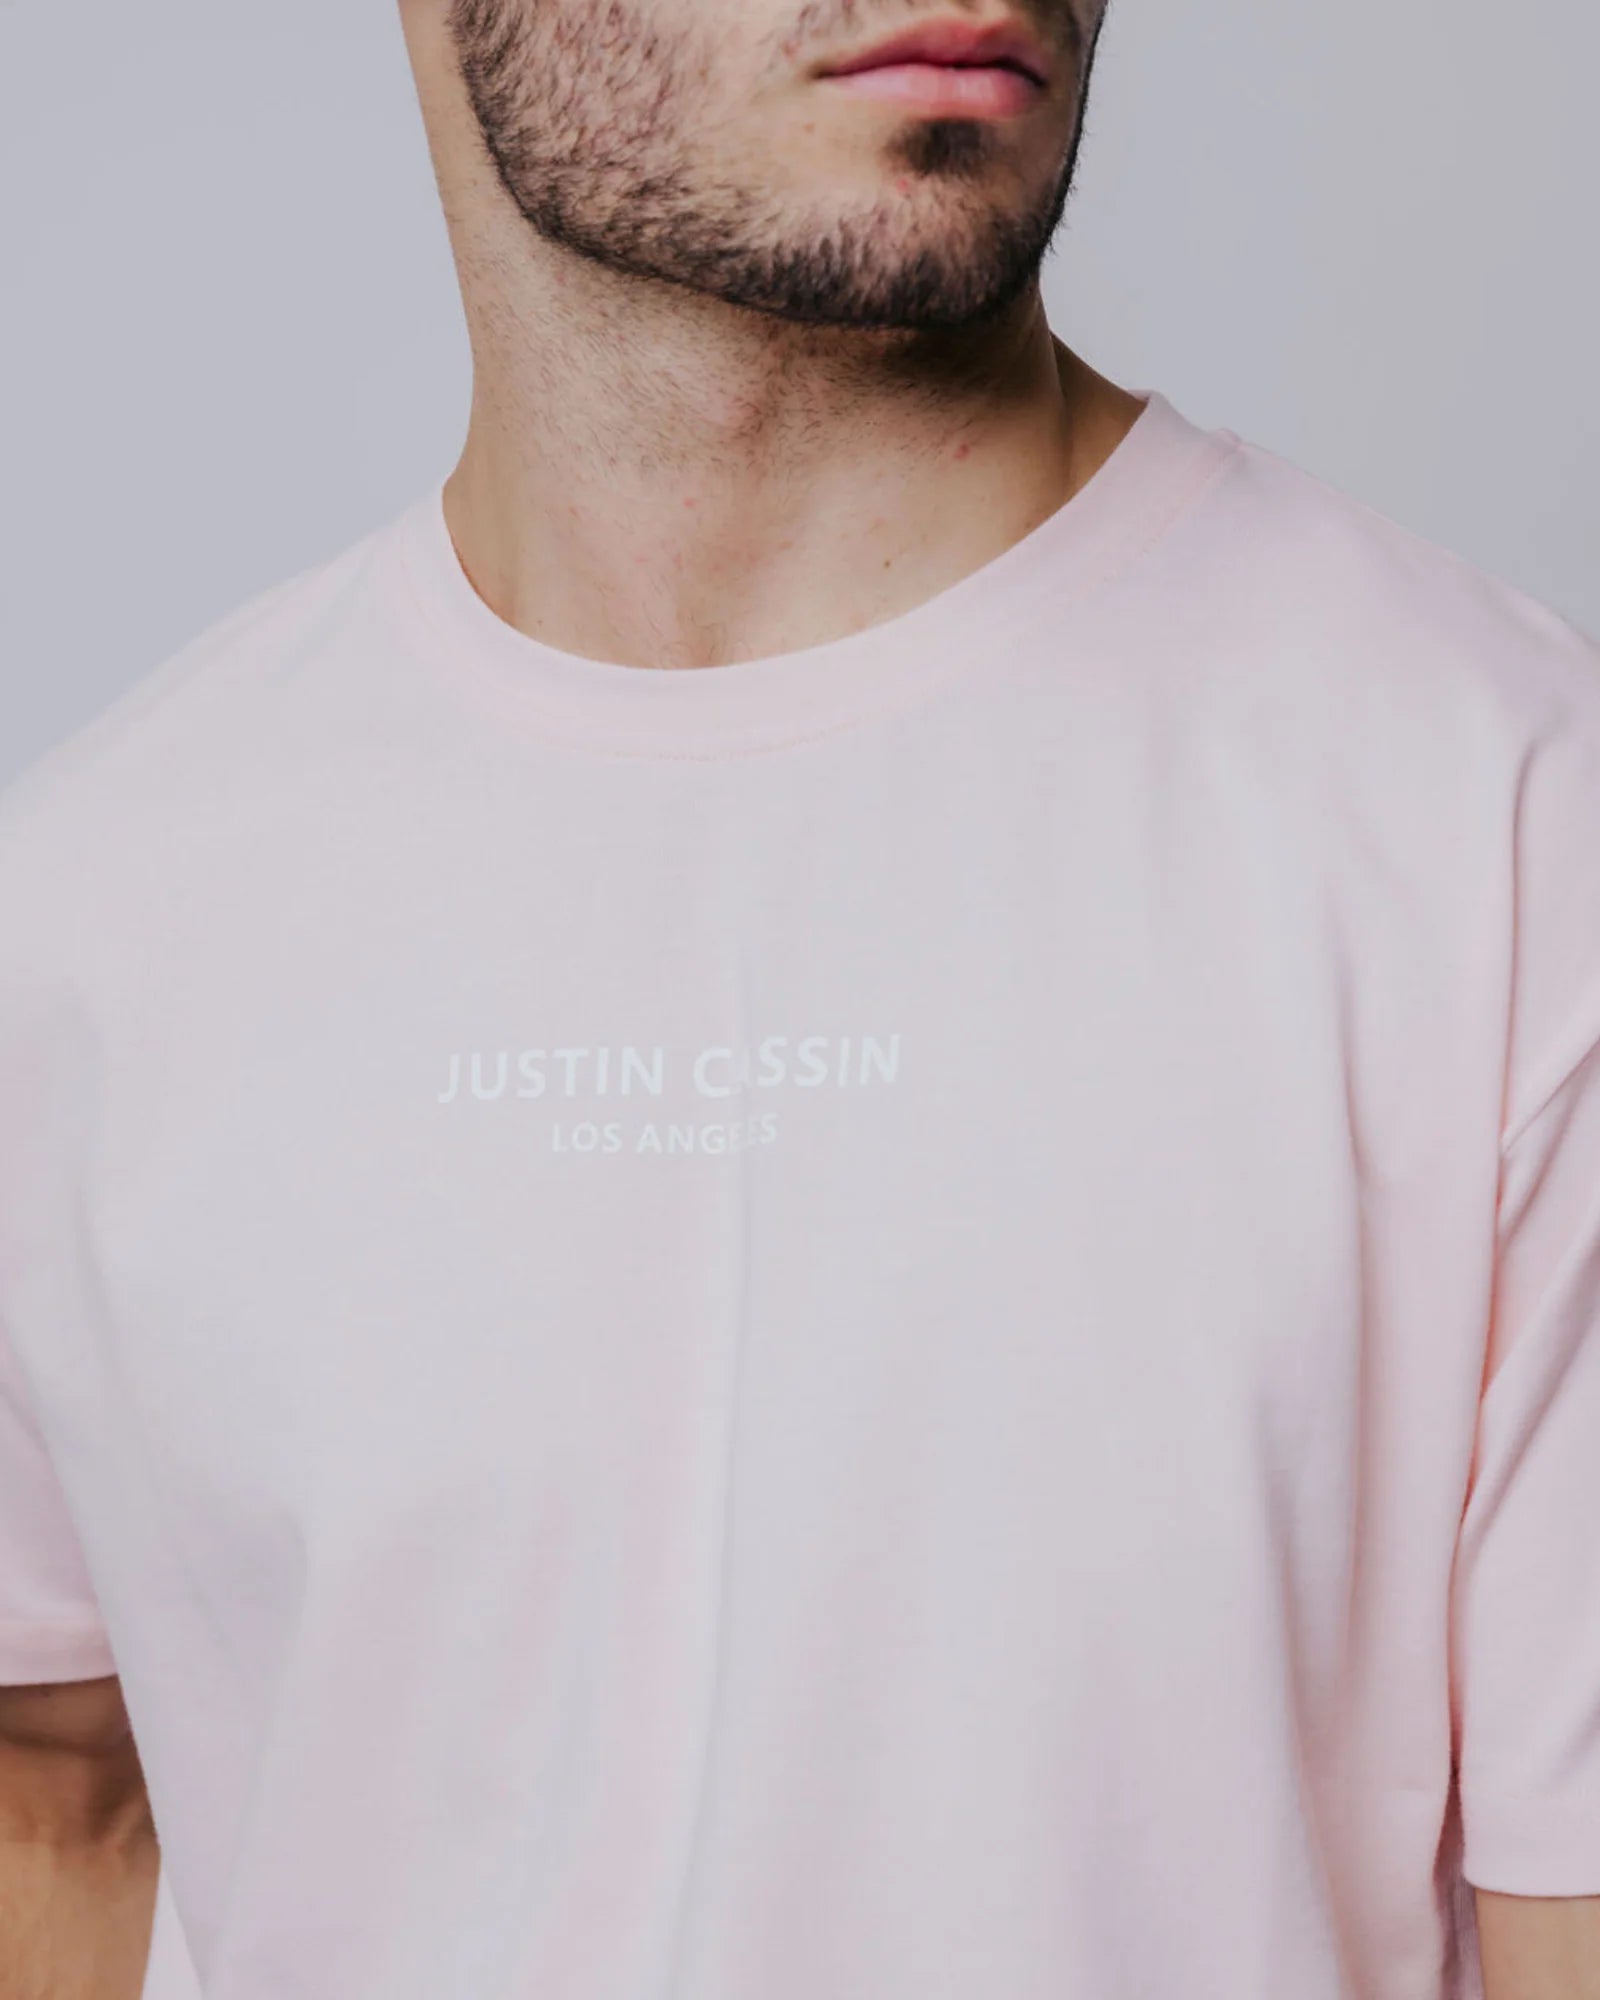 Justin Cassin Essential T-Shirt in Dusty Pink Color 3